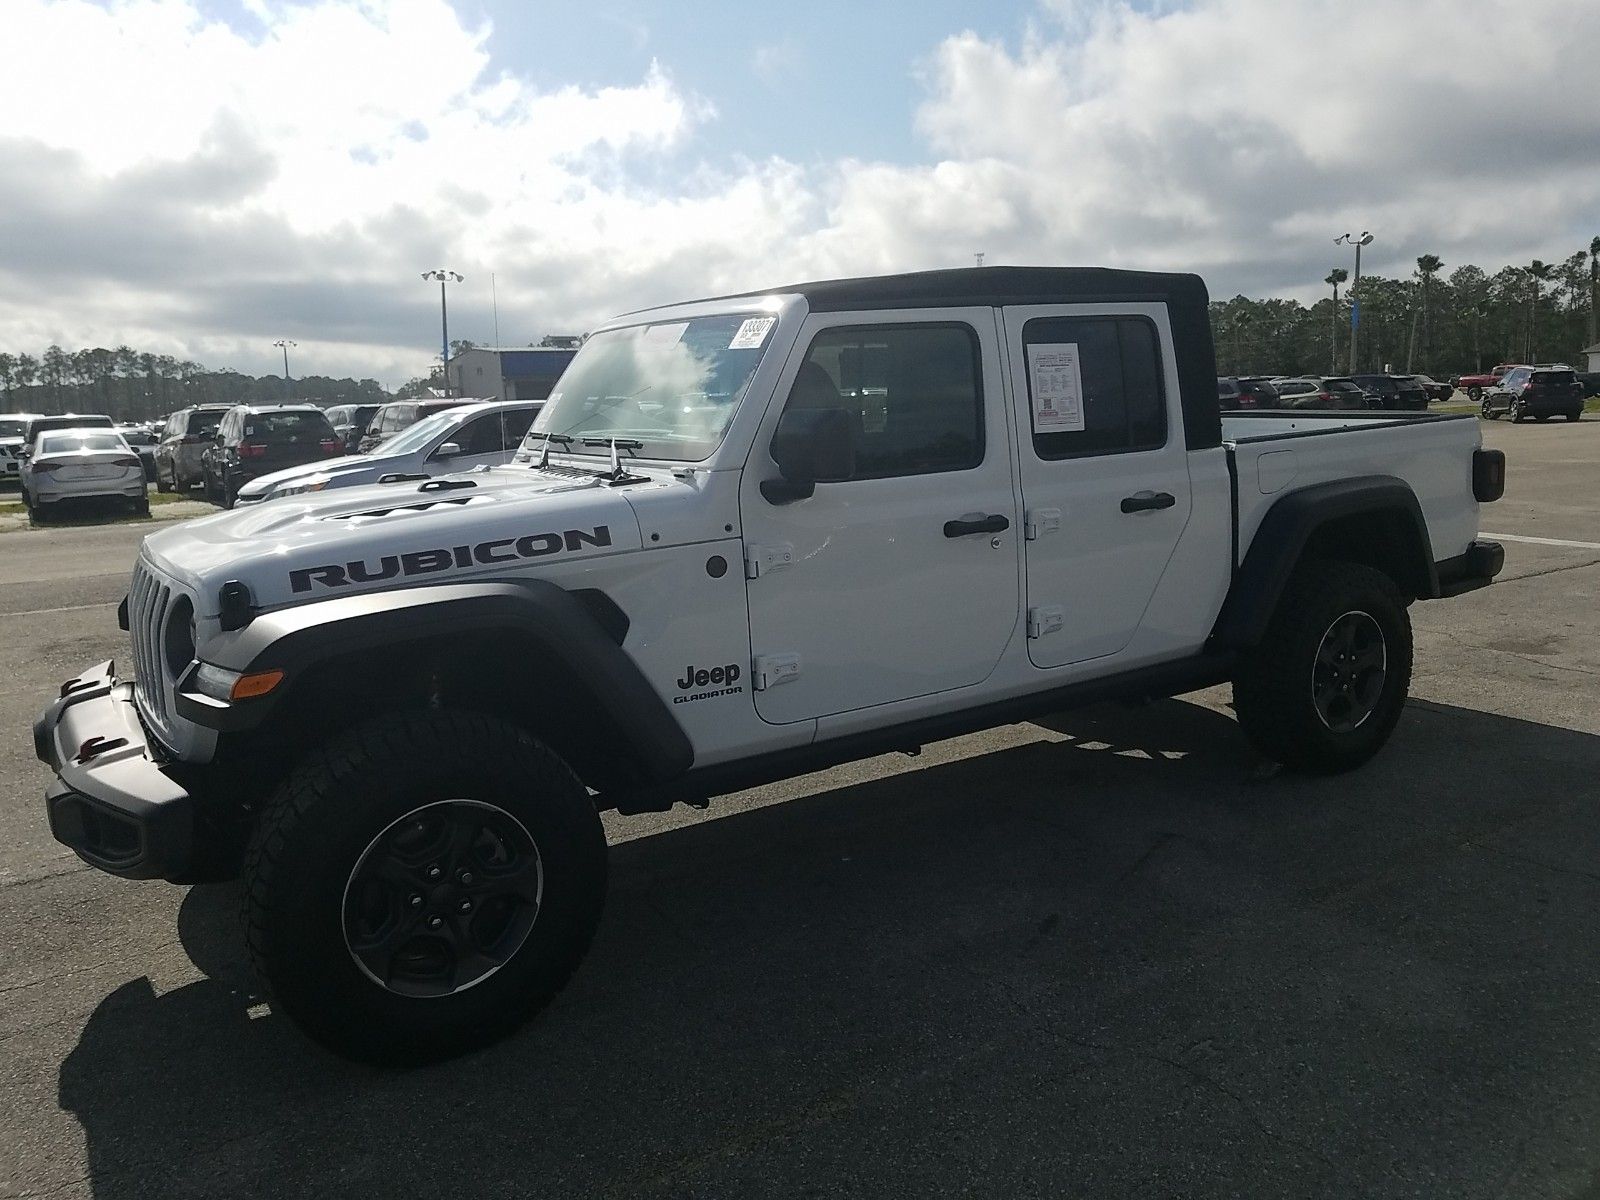 Jeep Dealership Near York Pa for Beginners